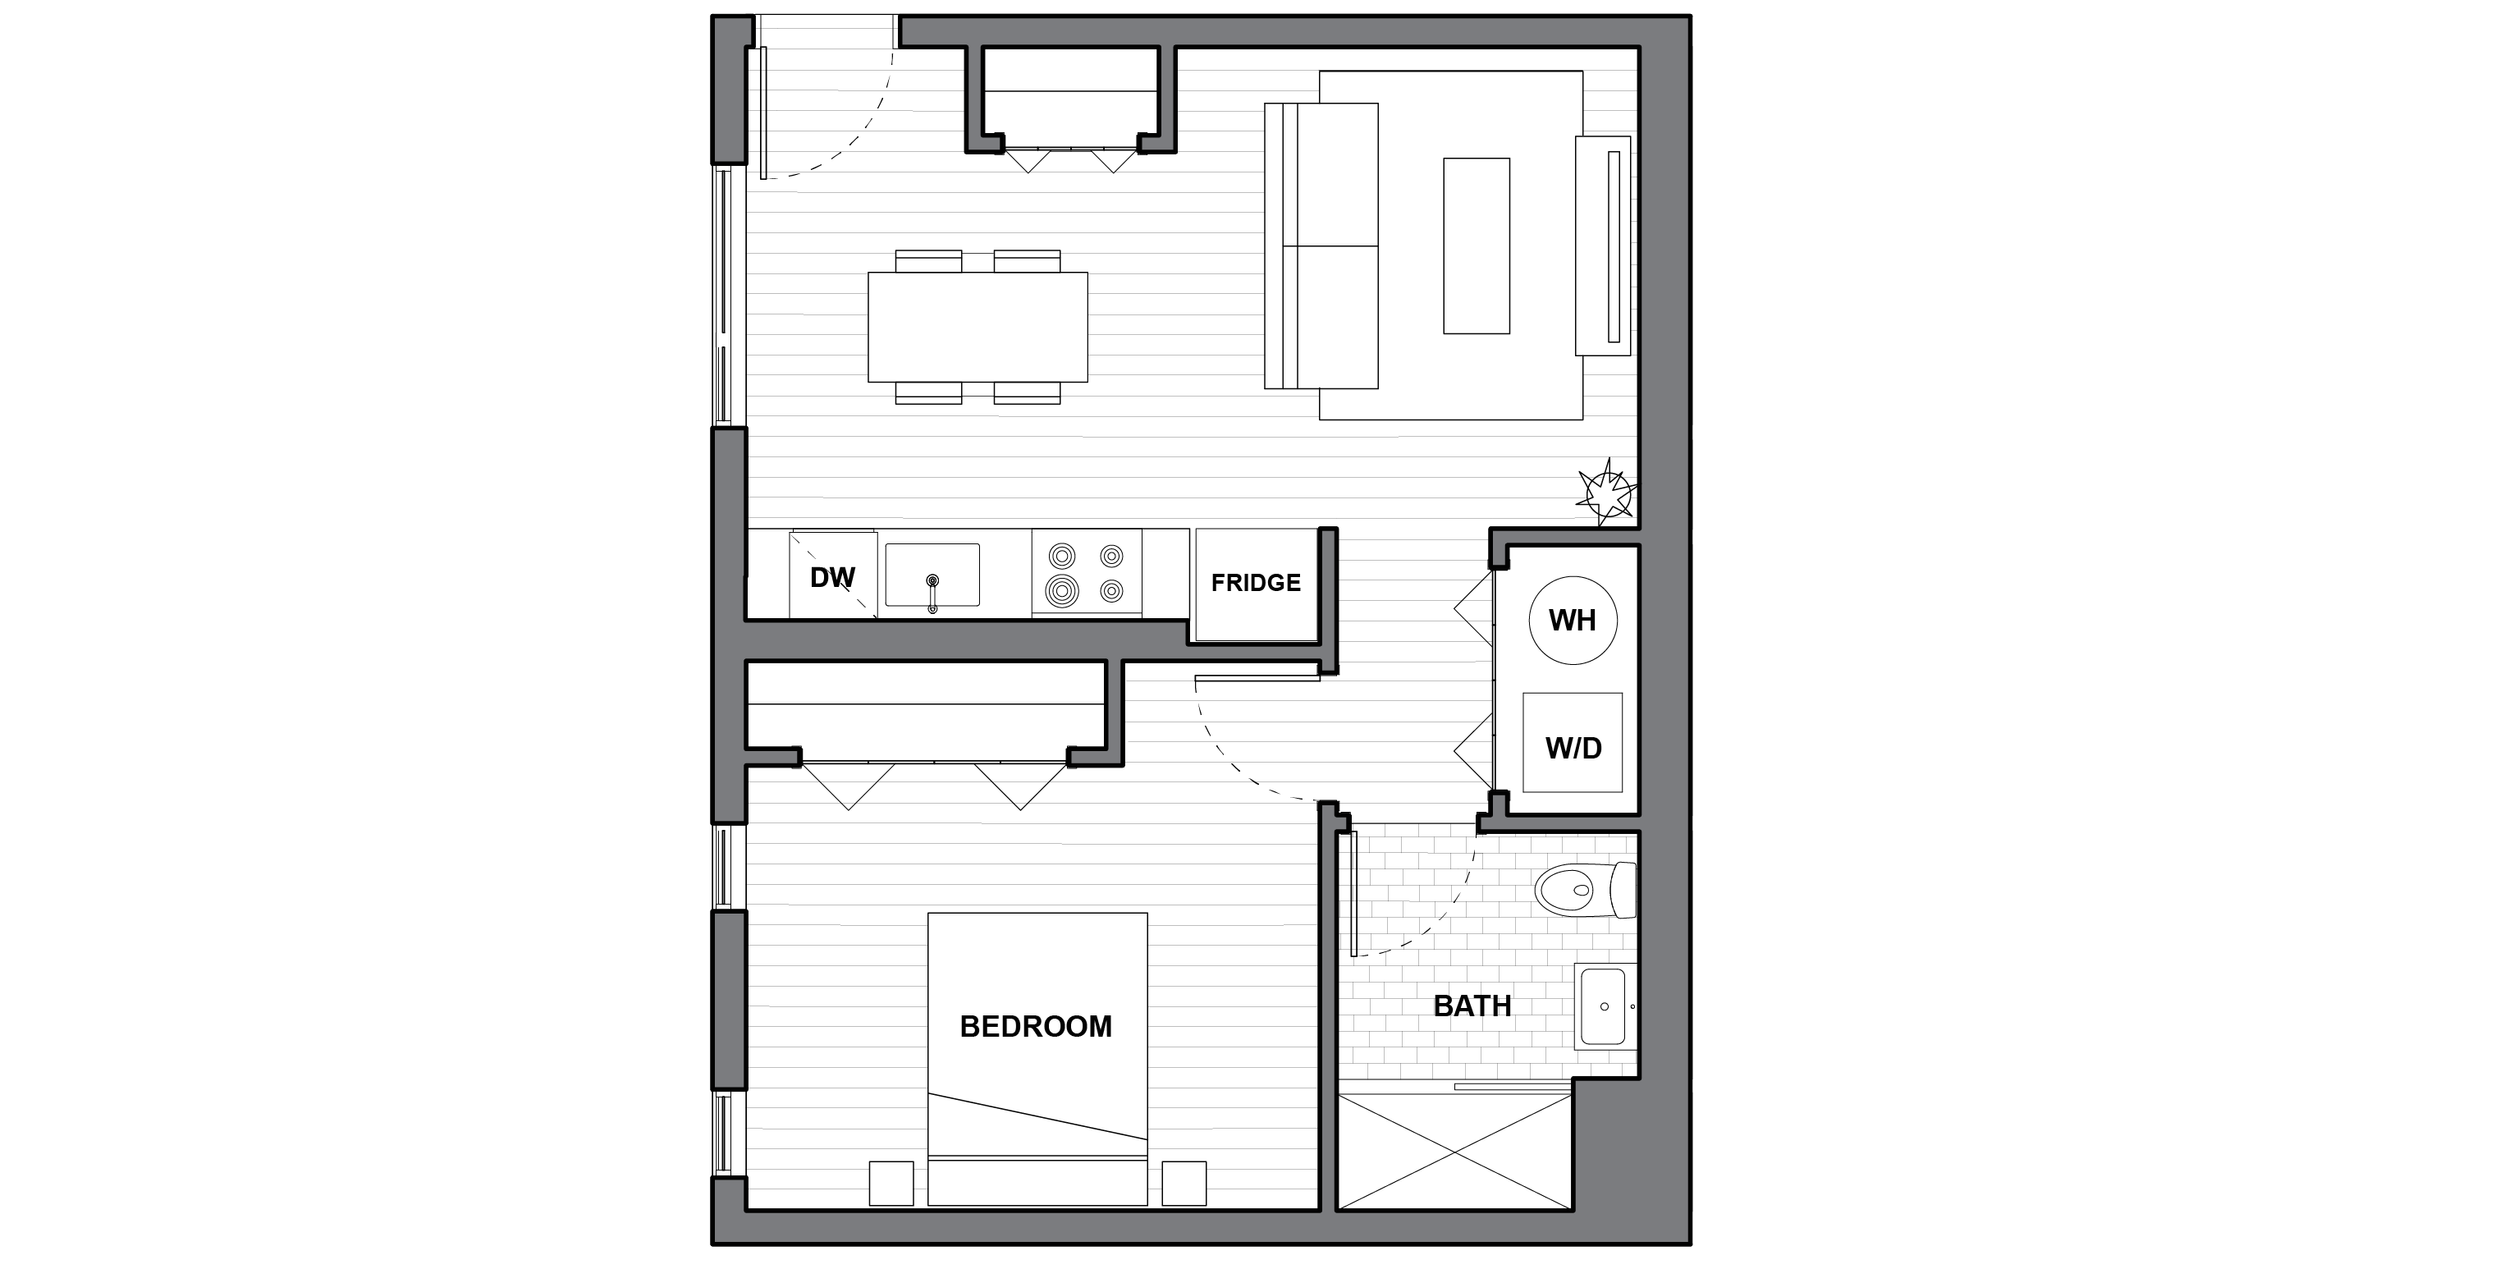   UNIT 303  1 BEDROOM / 1 BATH 603 SQUARE FEET   REQUEST INFORMATION / APPLY FOR THIS UNIT   